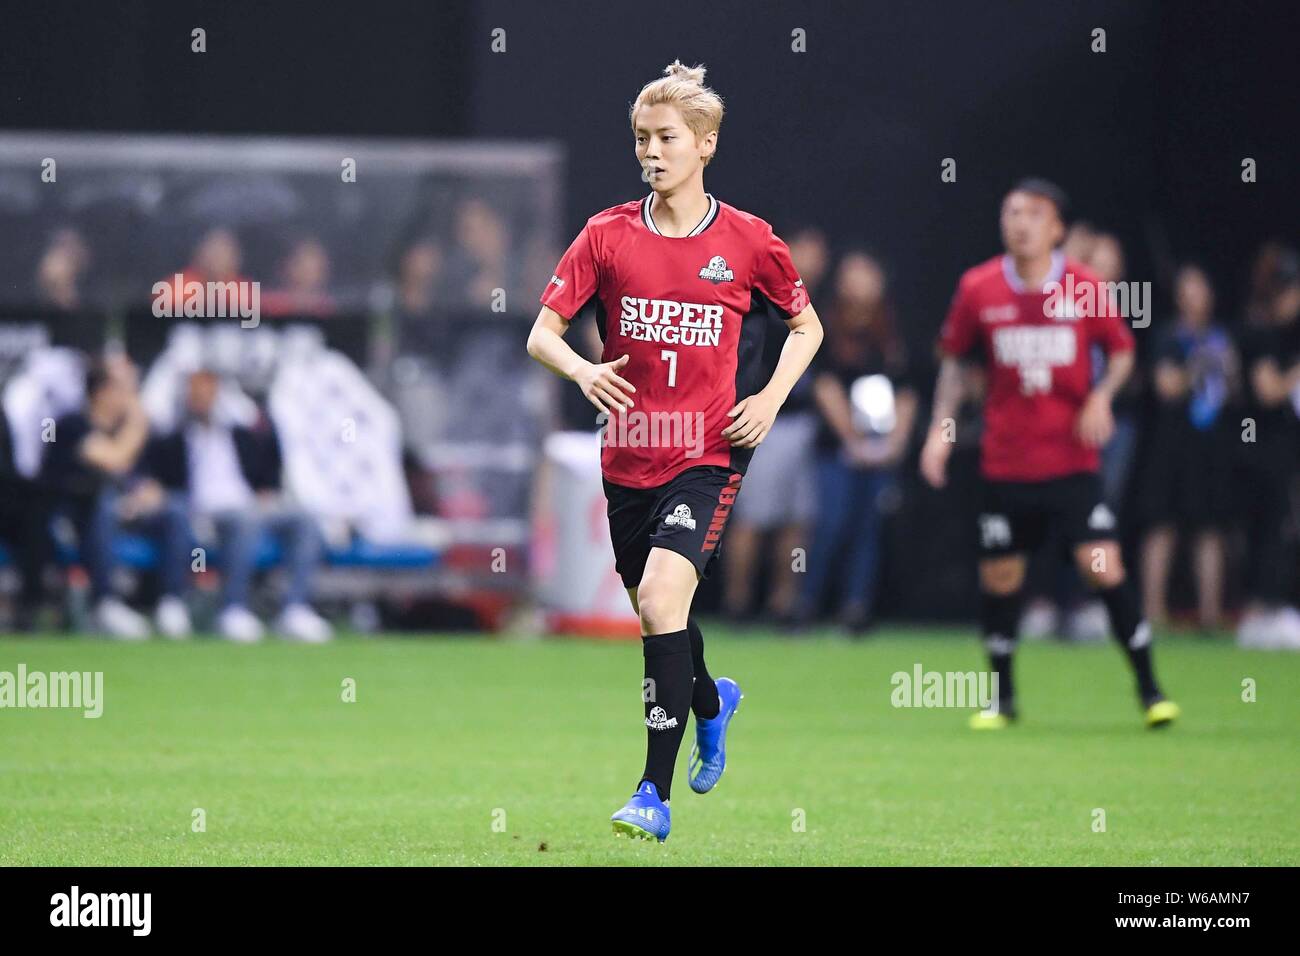 Chinese actor and singer Lu Han, of Chinese Celebrity is pictured during the 2018 Super Penguin Soccer Celebrity Game against International Legends in Stock Photo